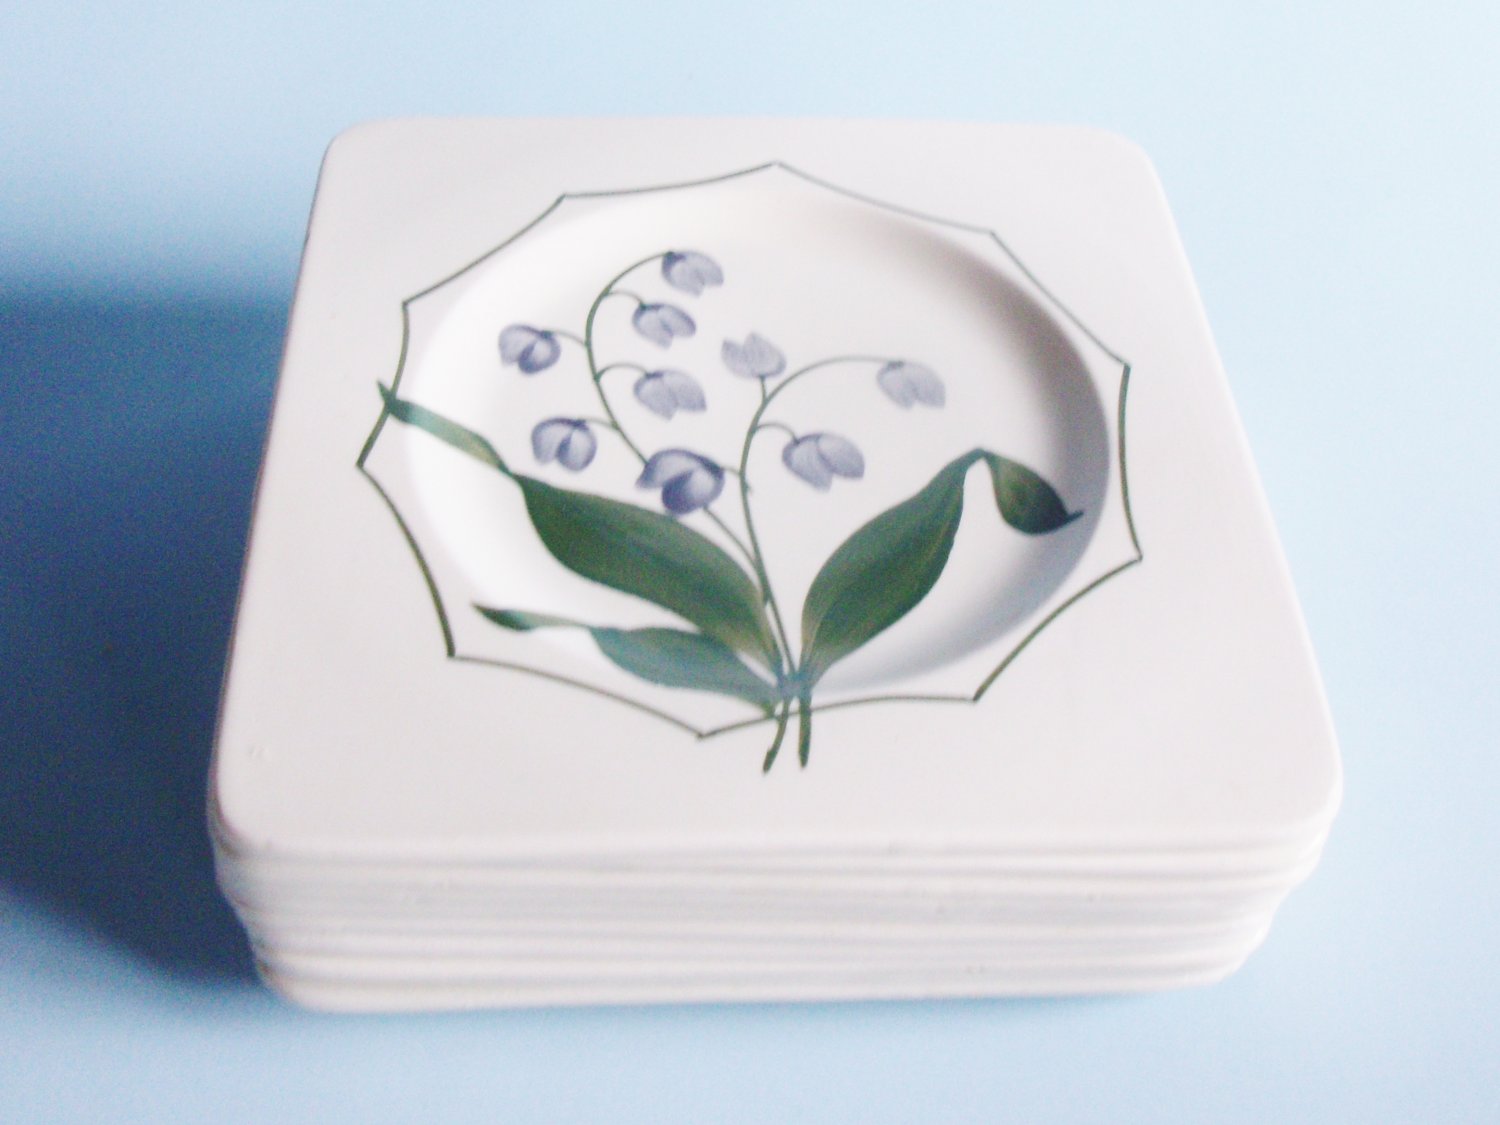 Gien Muguet Lily Of The Valley Dessert Plates 5.75 Inches Square Set Of 11 Plates From France